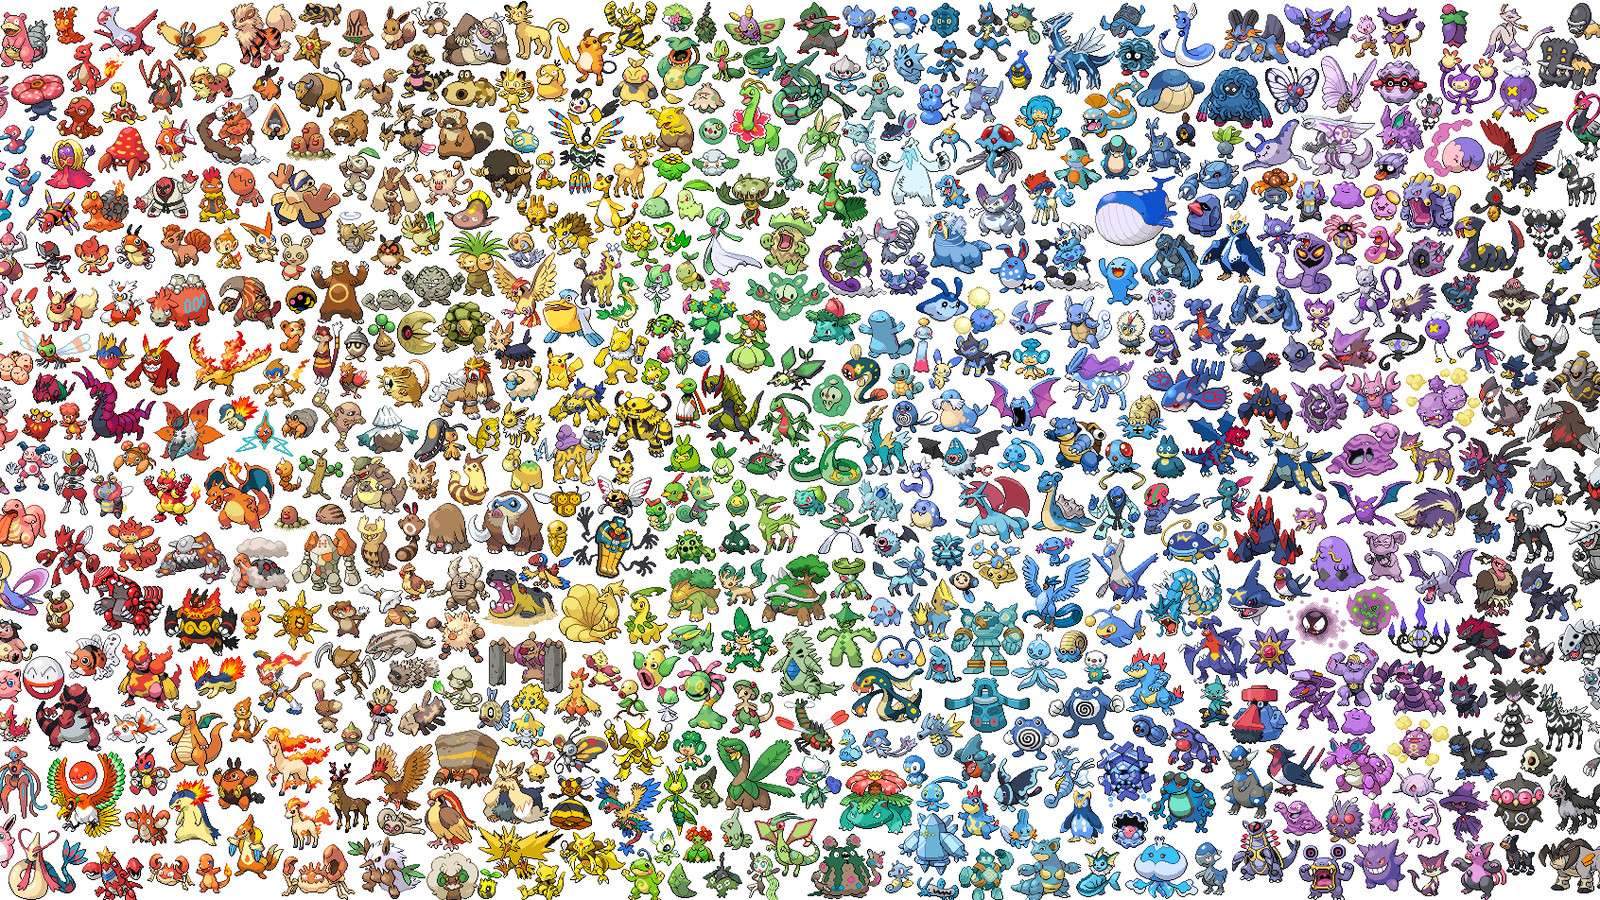 I caught every Pokémon and it only took most of my life